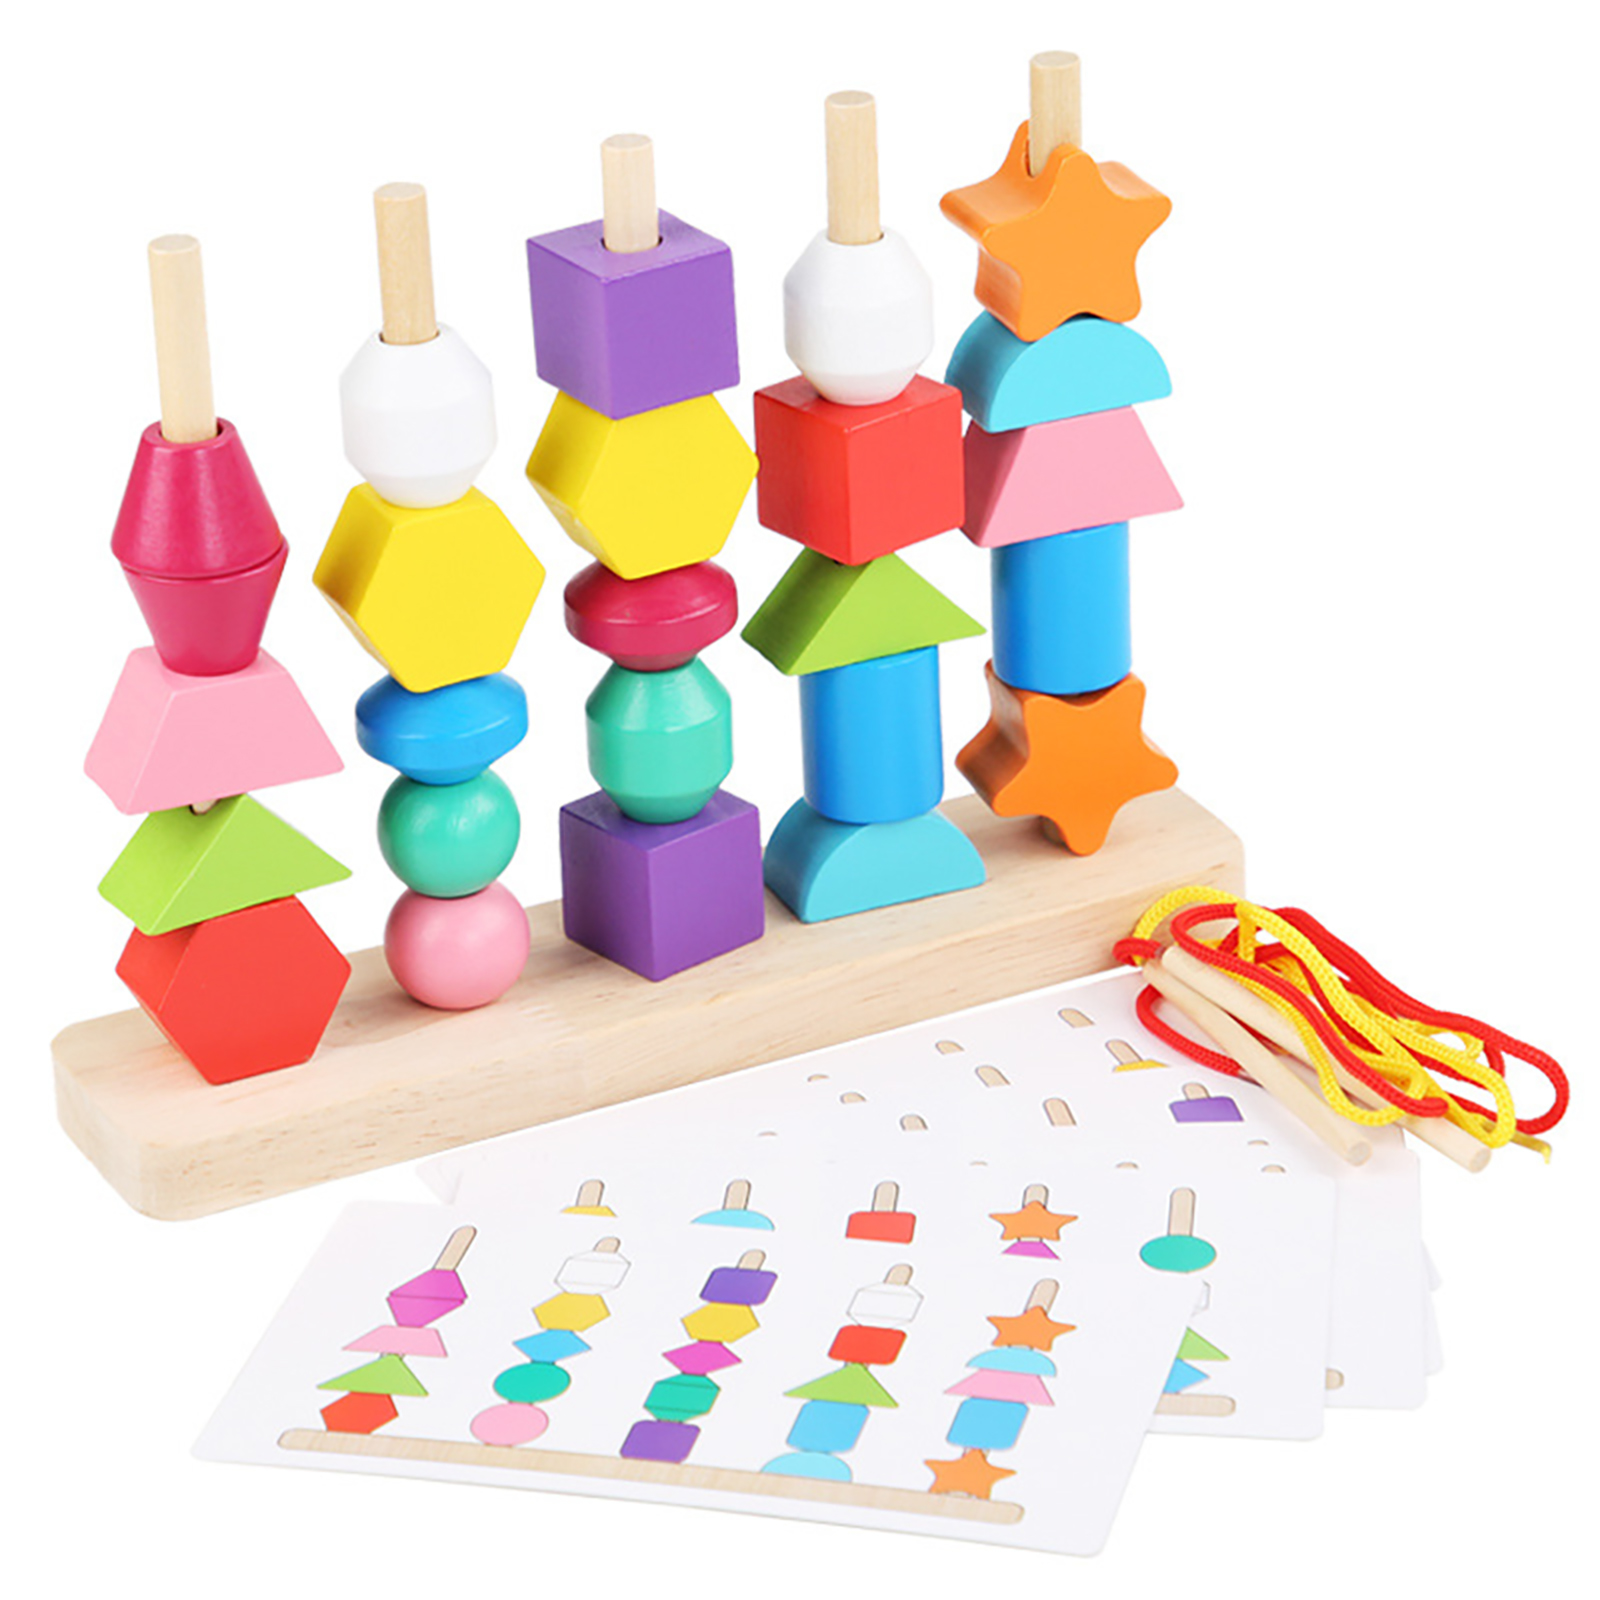 Beads Sequencing Toy Wooden Stacking Blocks Lacing Beads Shape Matching Color Cognition Learning Toys Gifts For Kids